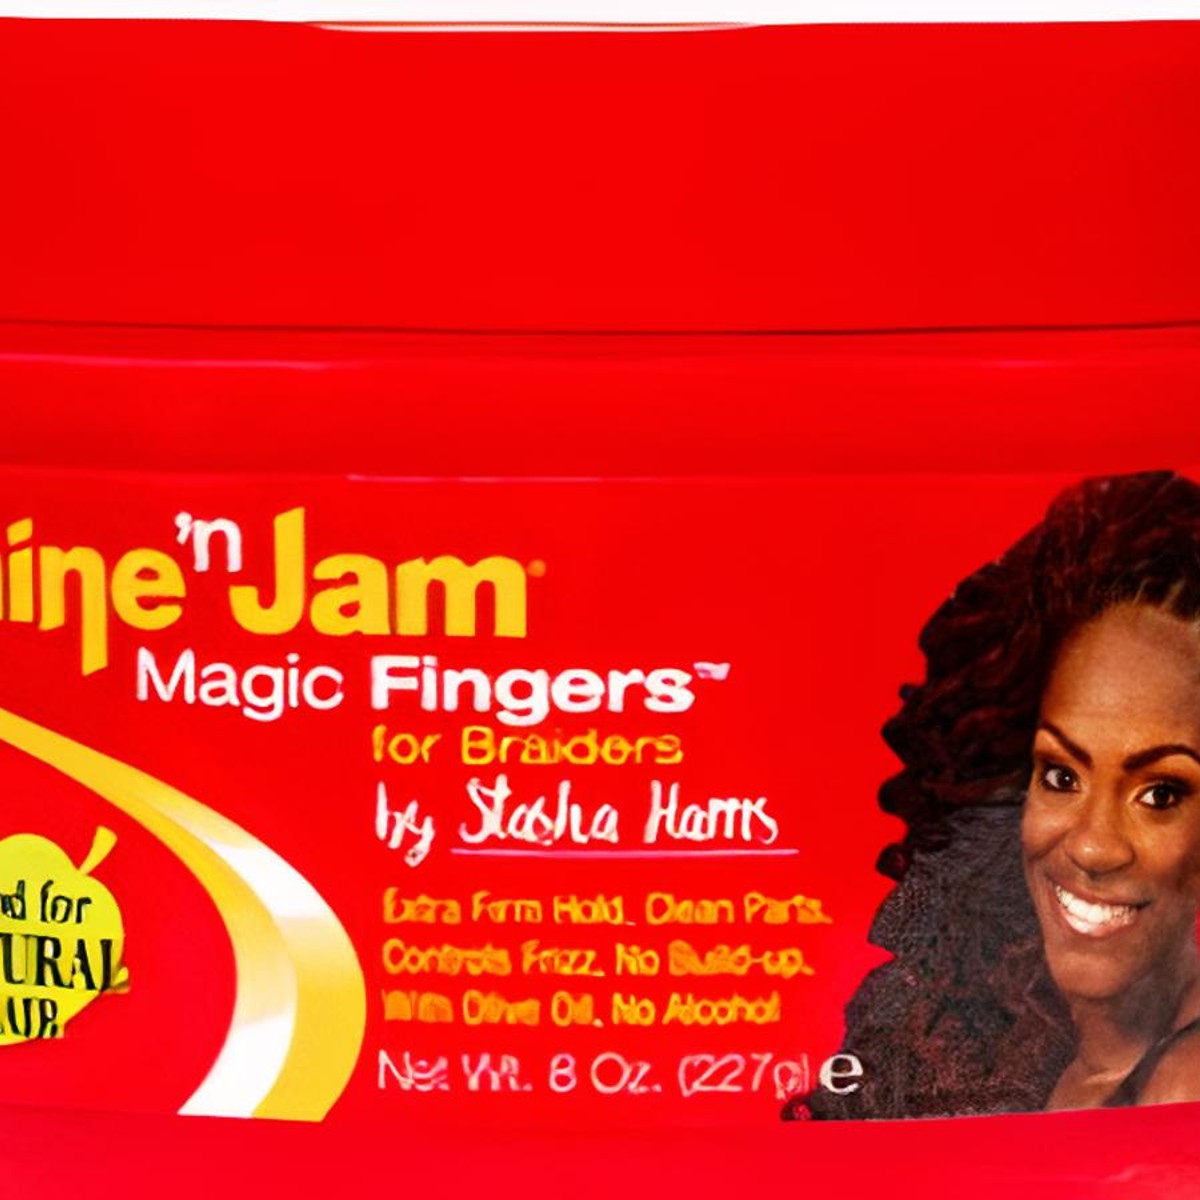 Ampro Shine-n-Jam Magic Fingers Gel for Braids - Provides Firm Hold with Non-Greasy Shine - Strengthens Hair with Silk Proteins - Works on Any Hair